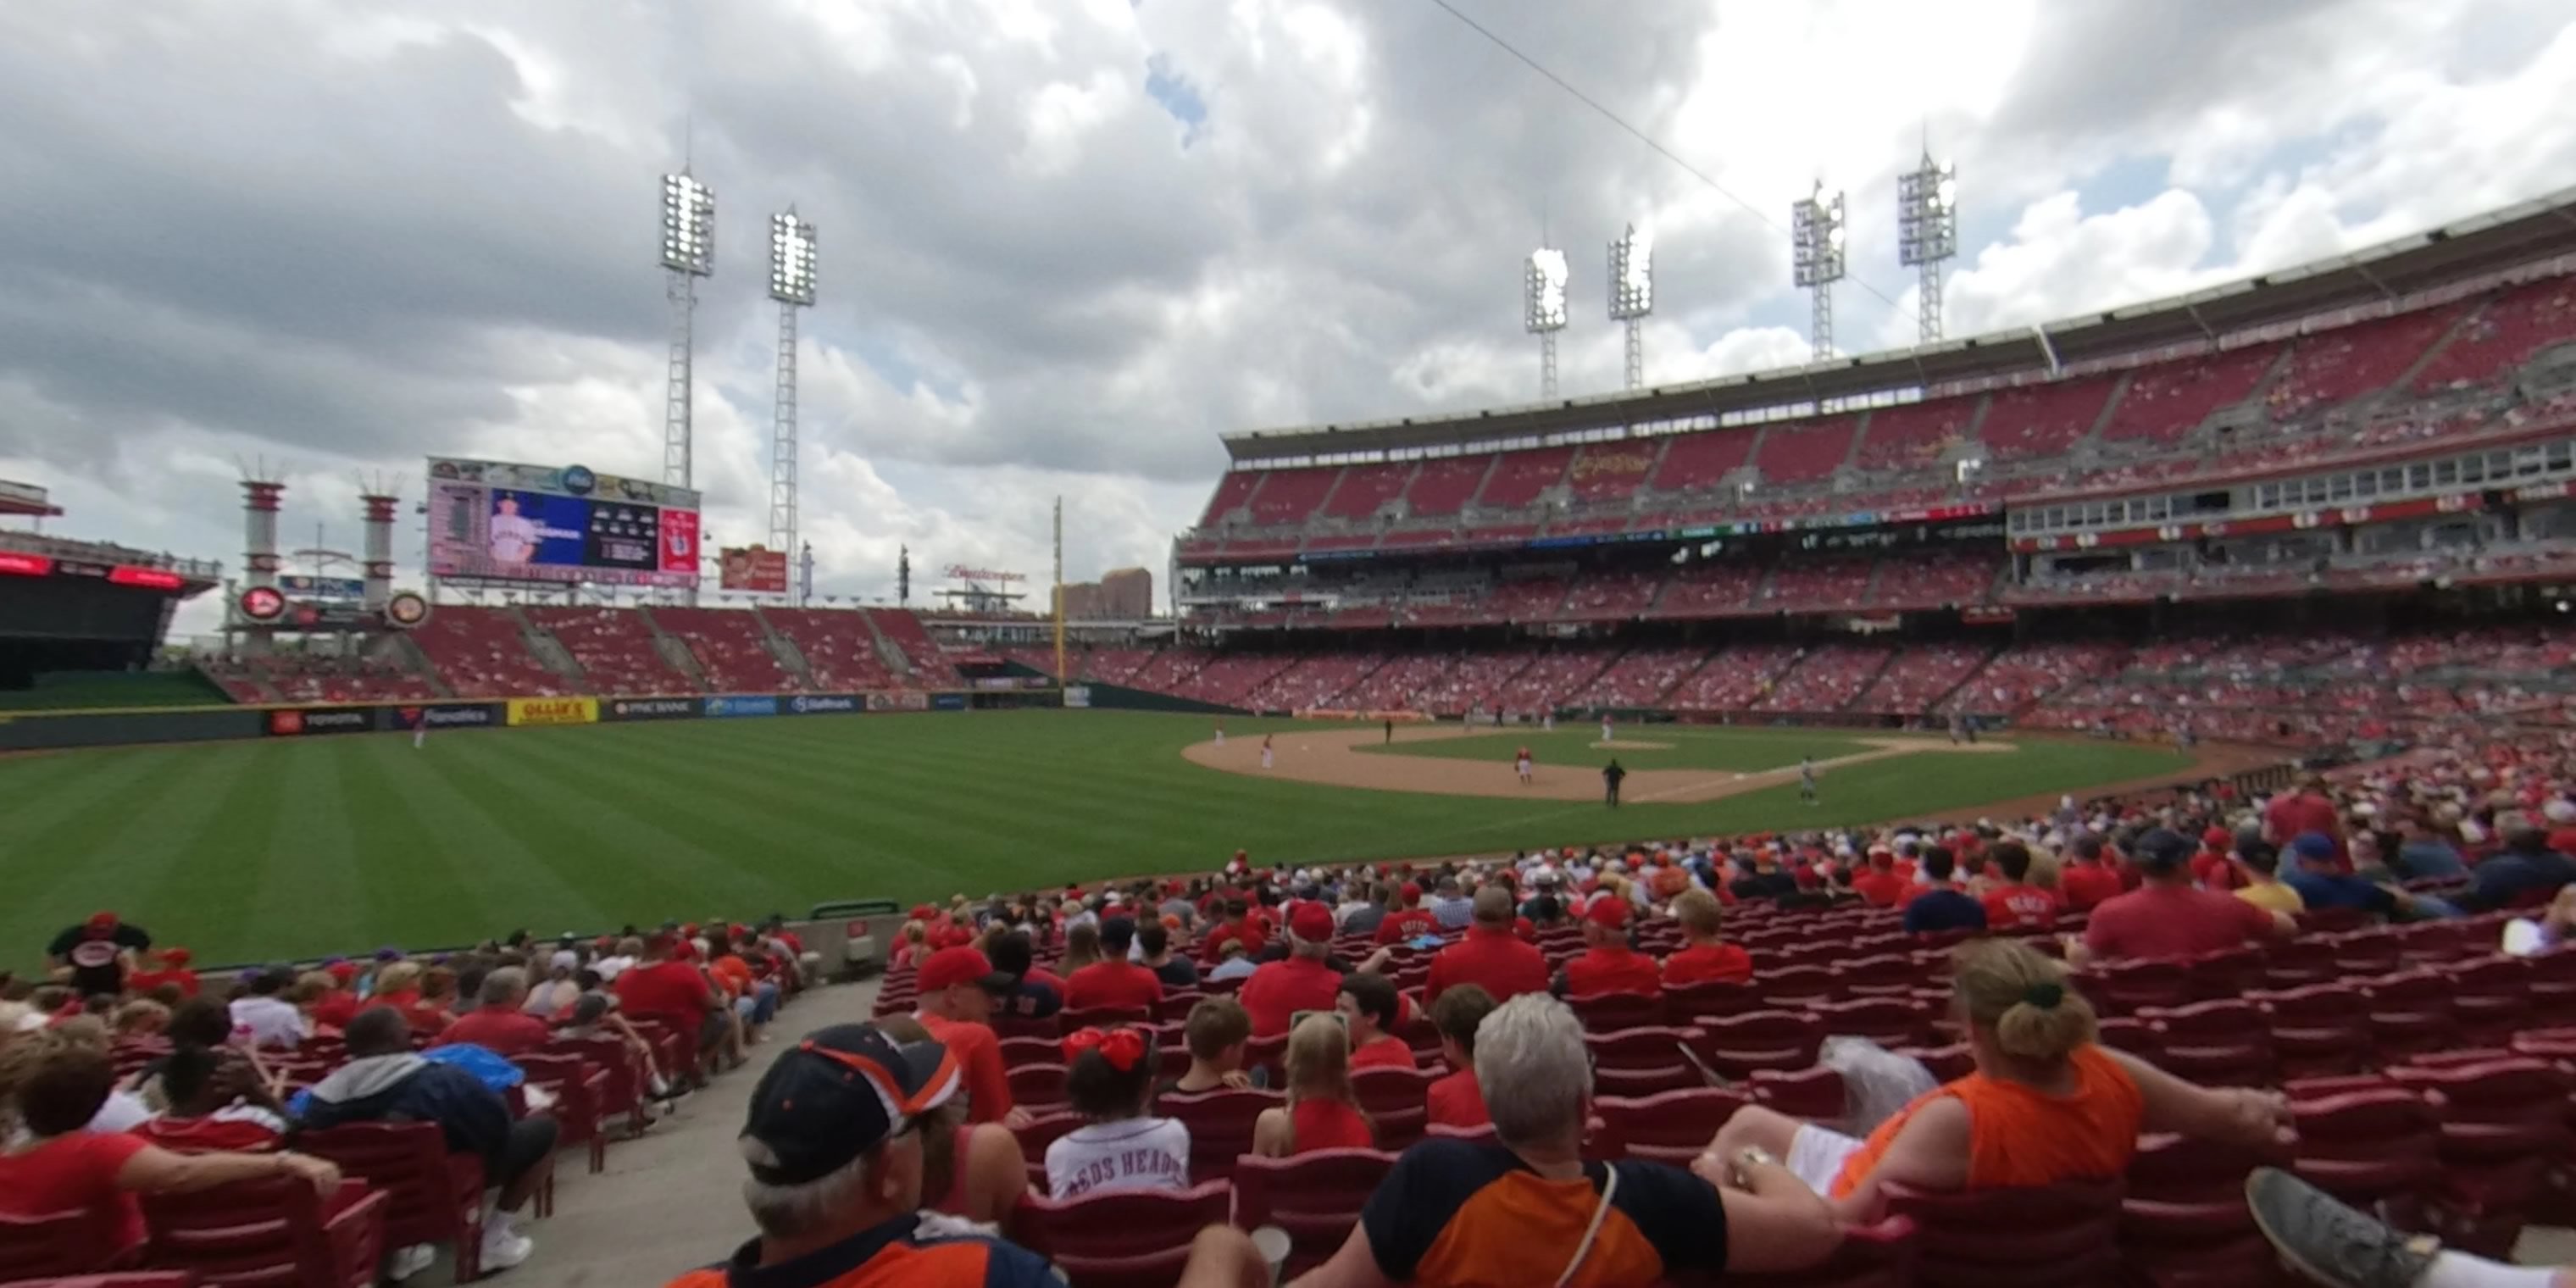 Section 111 at Great American Ball Park Cincinnati Reds